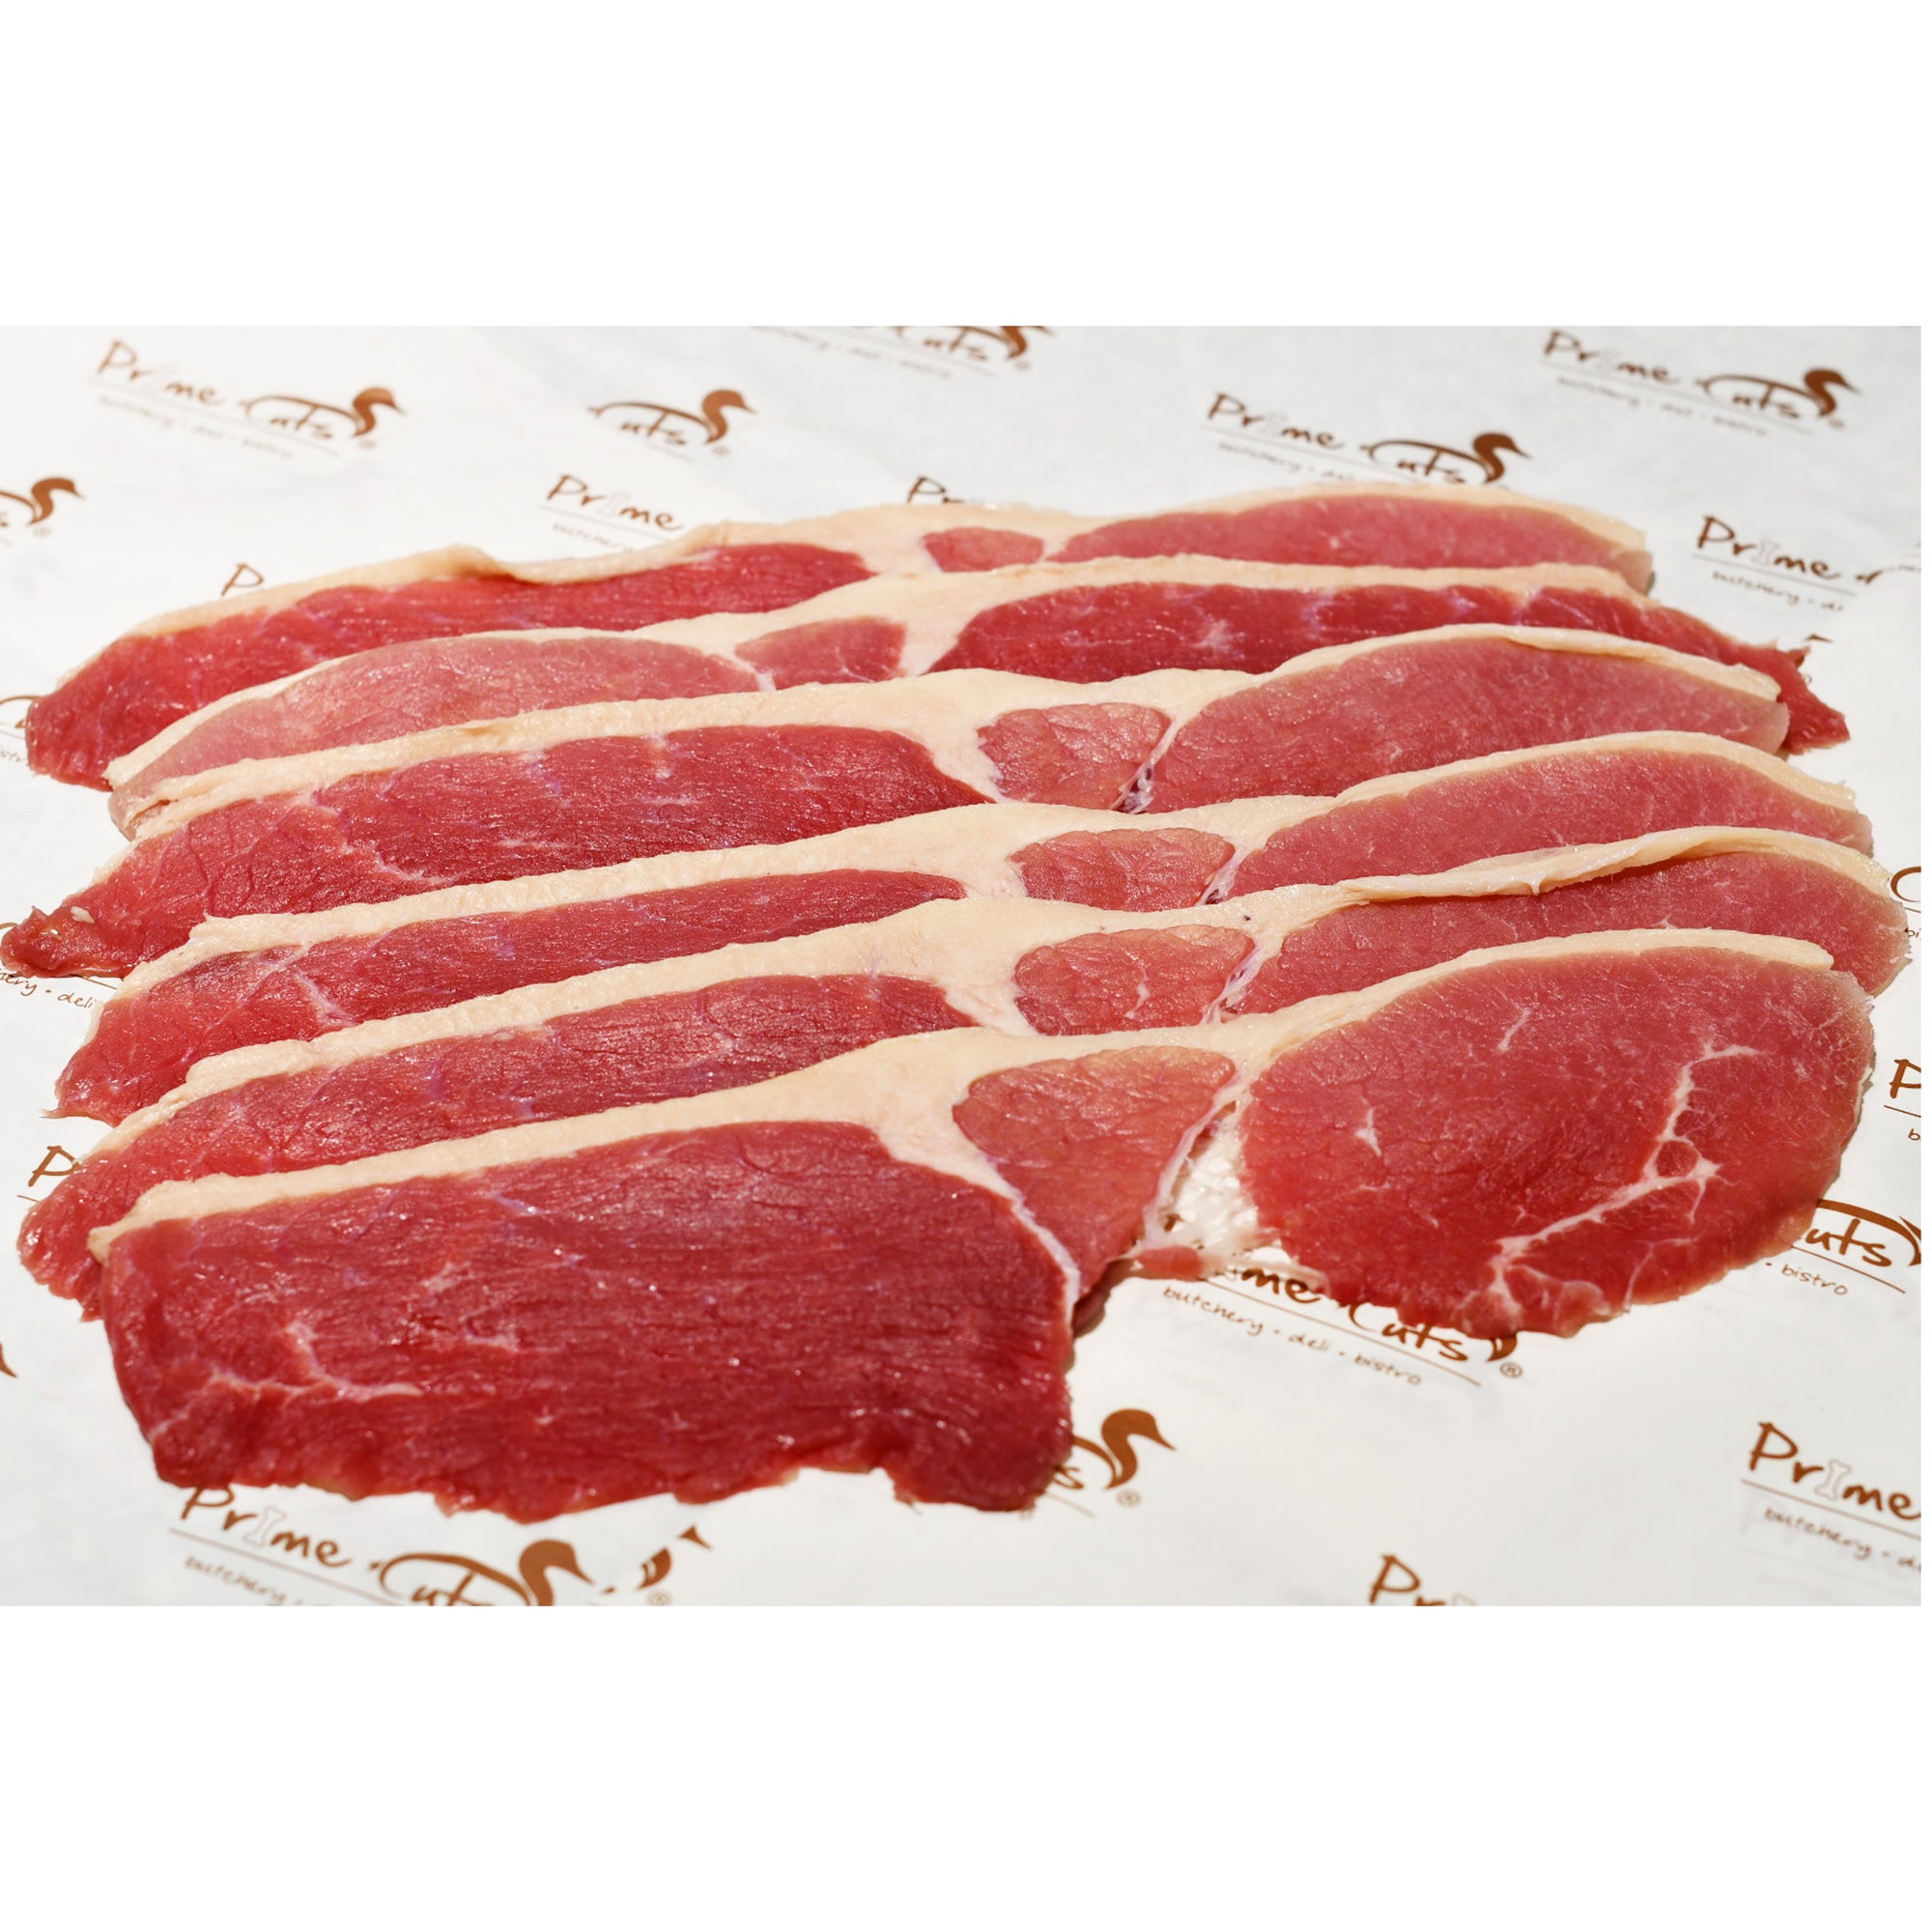 BEEF BACON SLICES - FROZEN (250g)